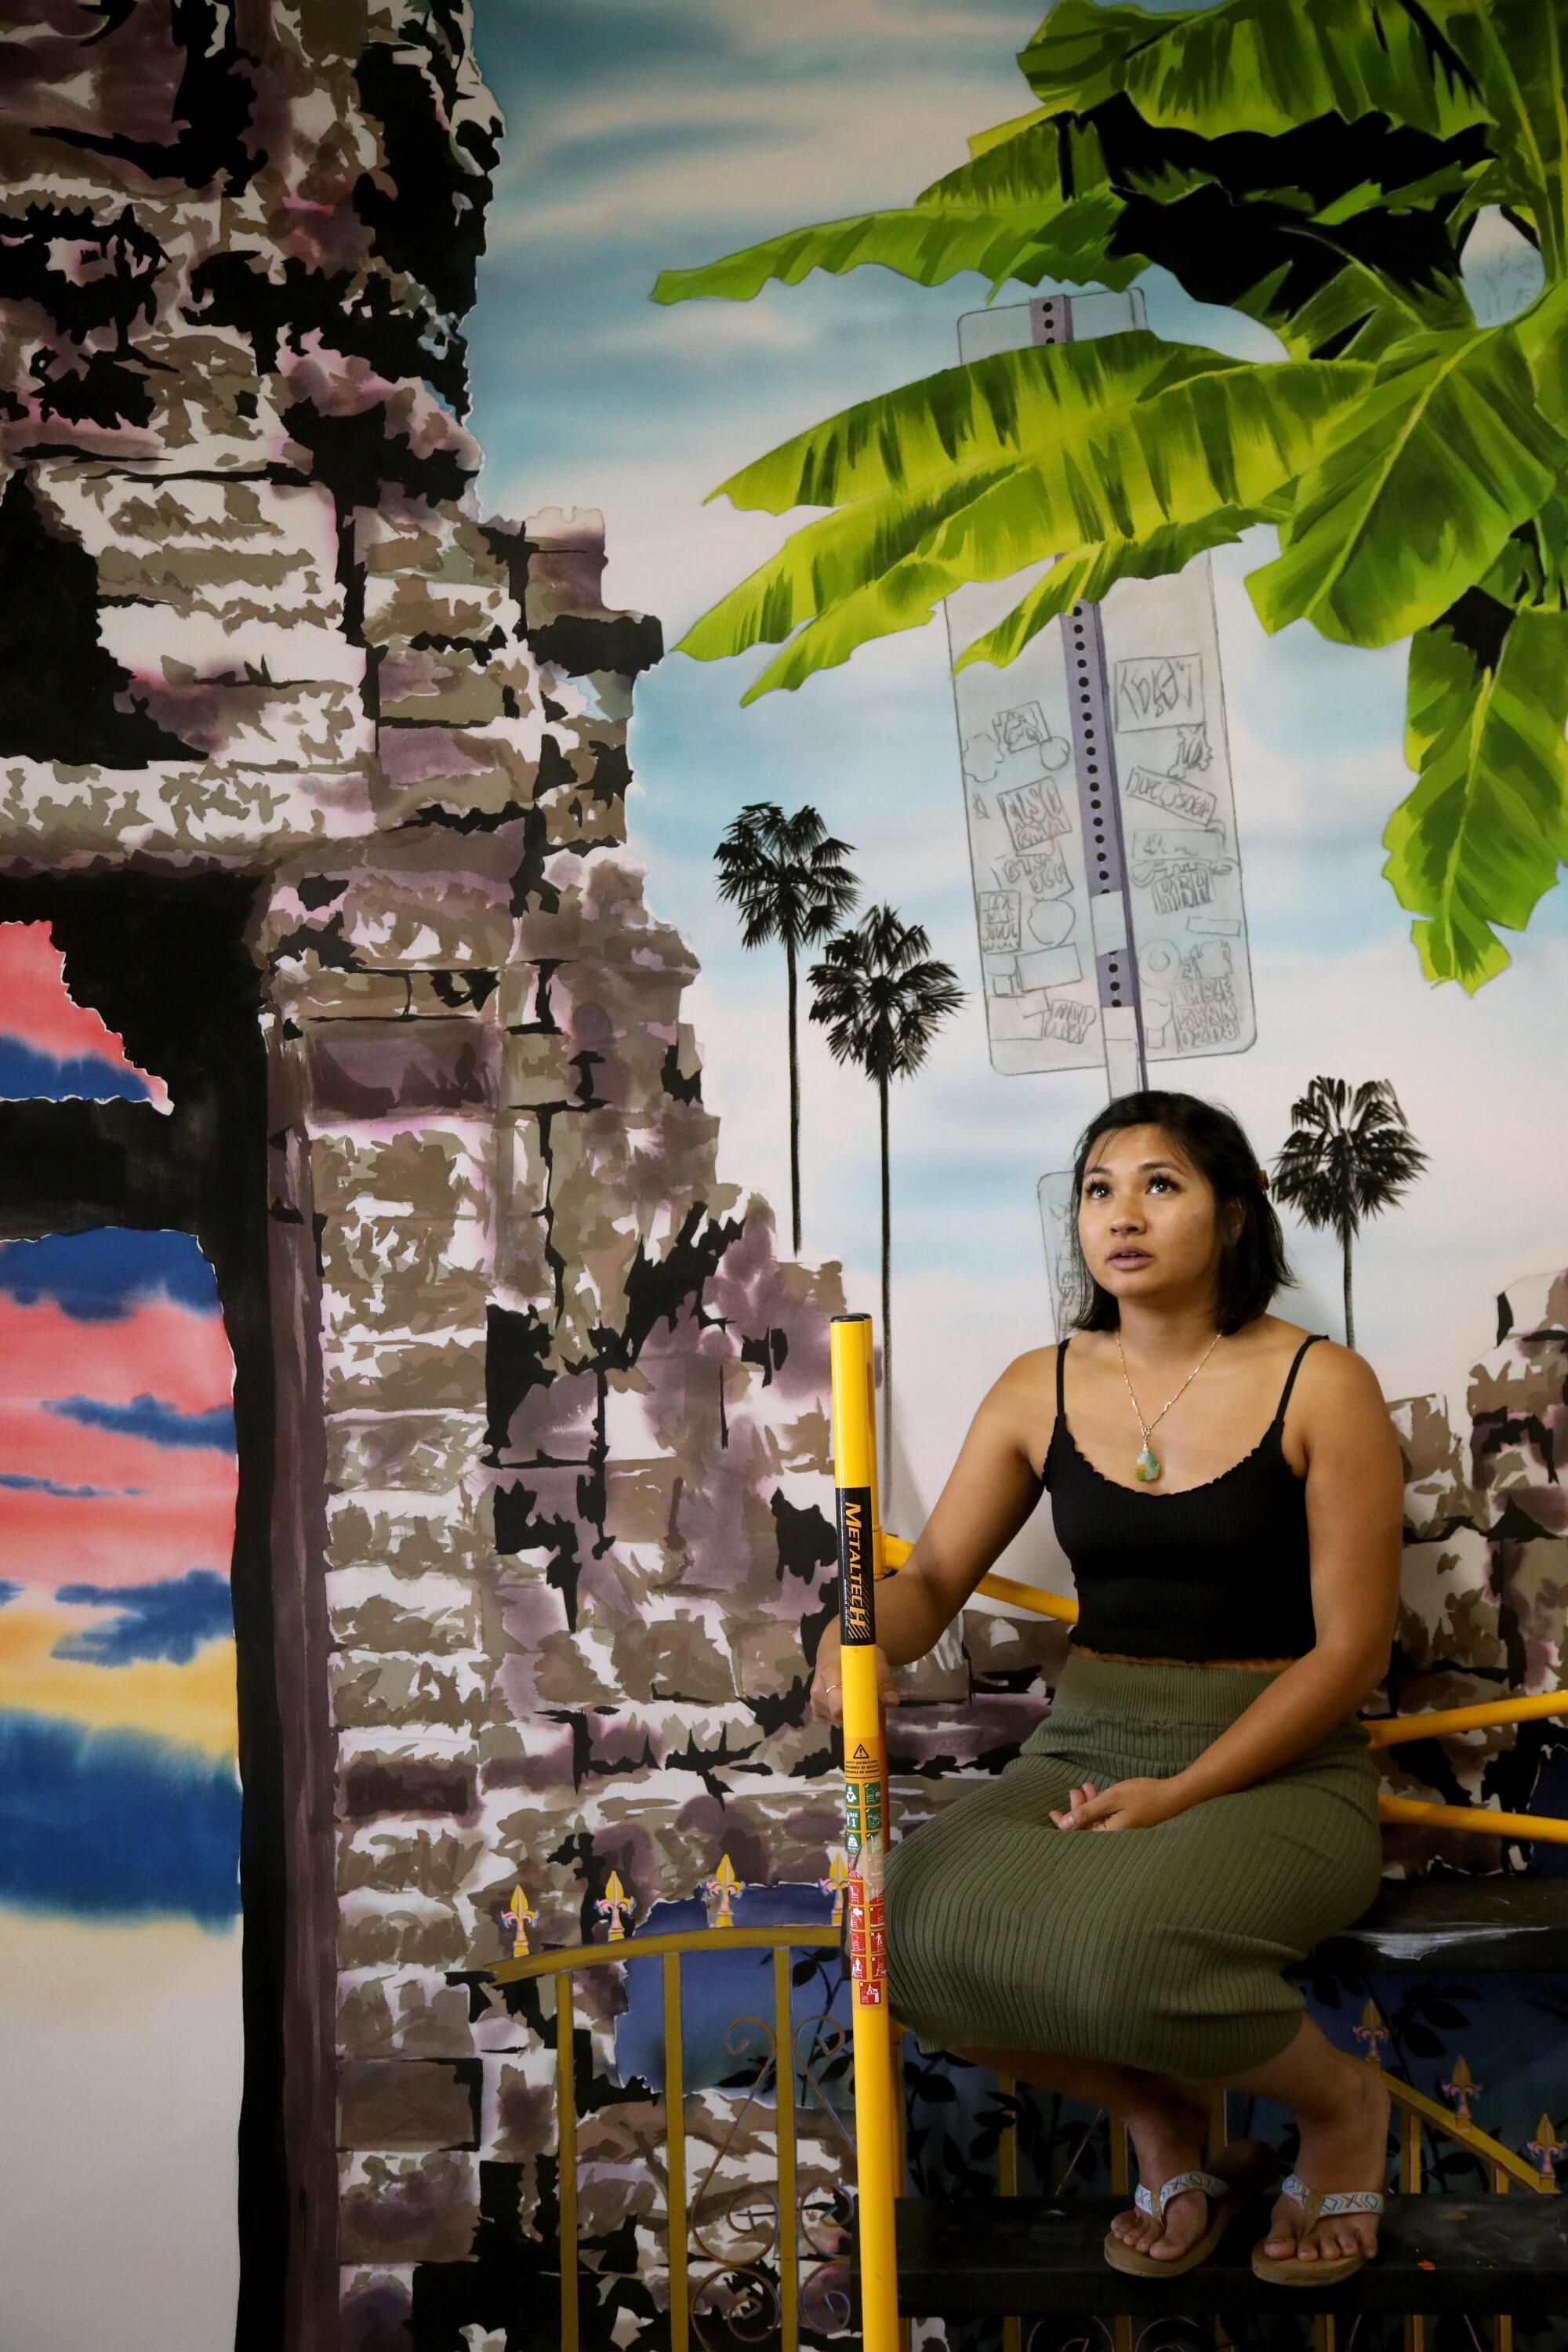 Tidawhitney Lek, a Cambodian American woman, sits on a scaffold in a studio lined with paintings.